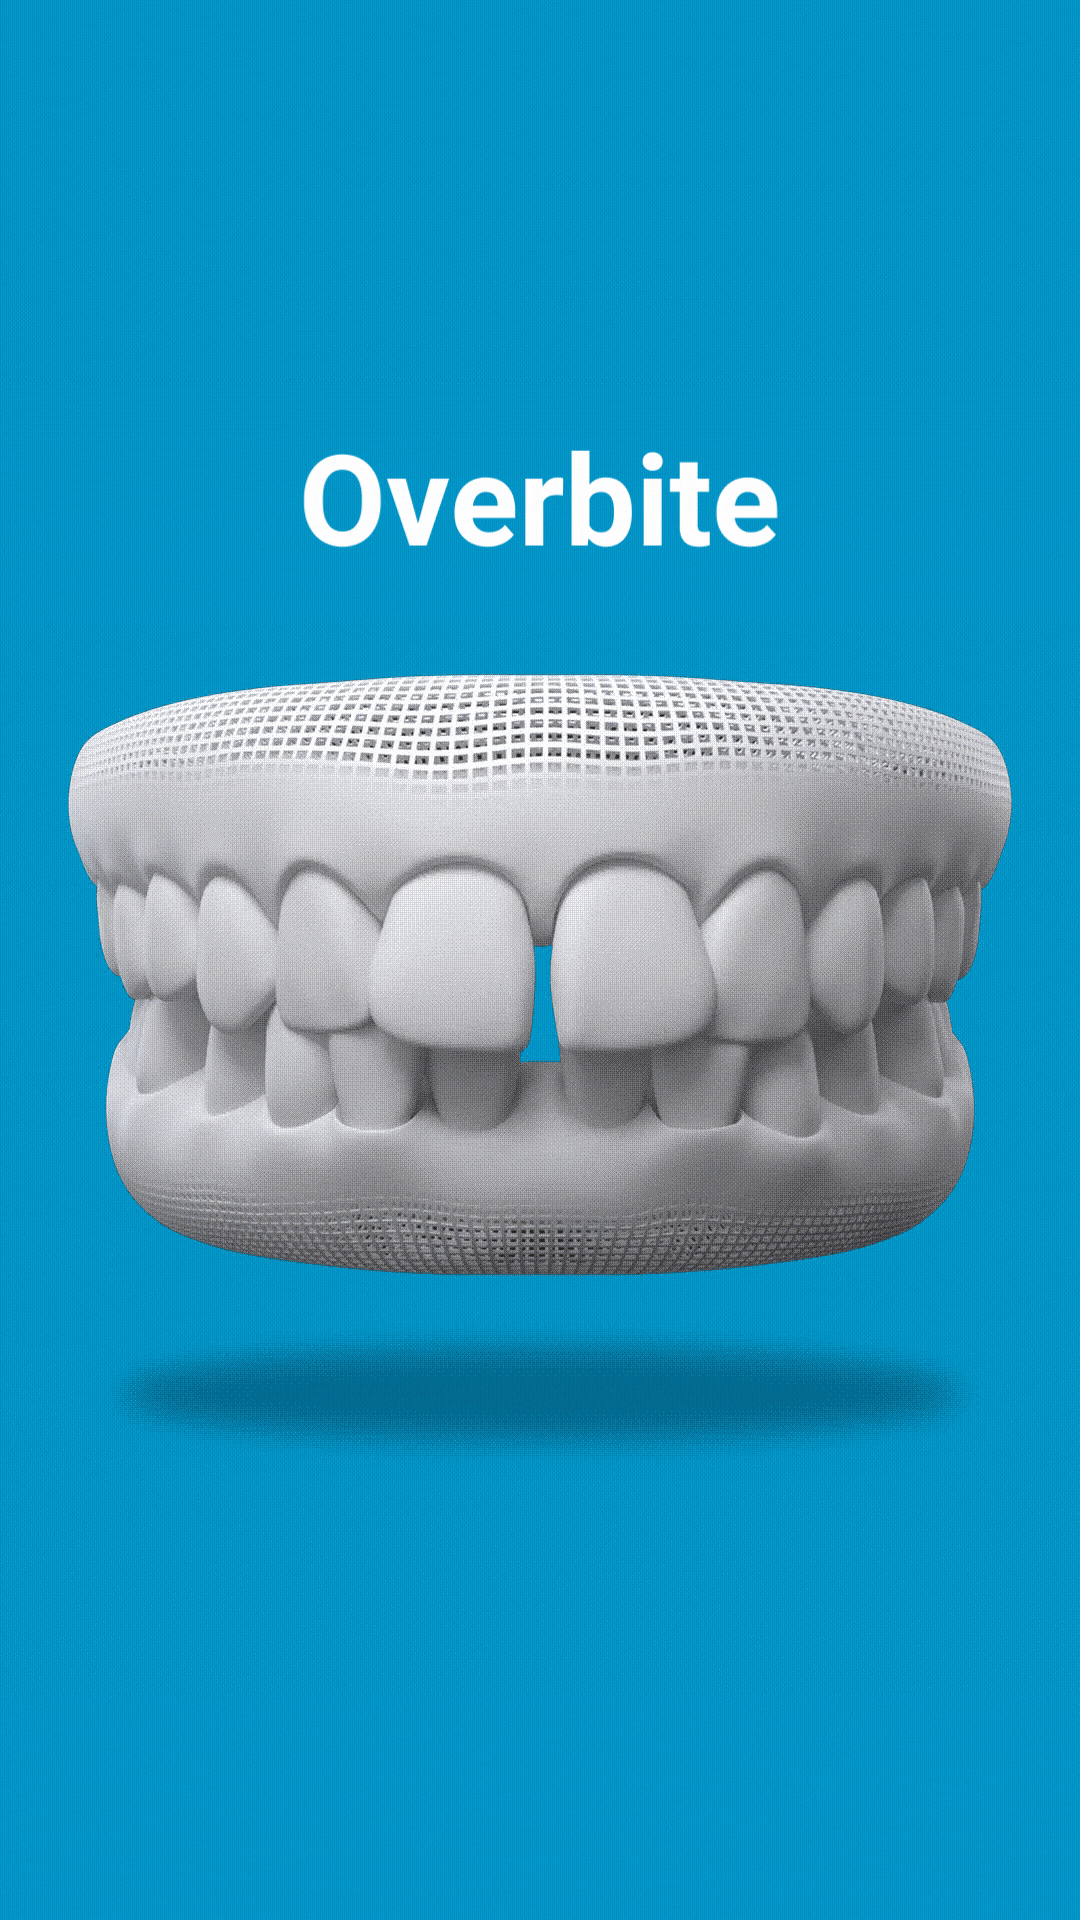 belmont dentistry scottsdale invisalign can fix dental overbite issues